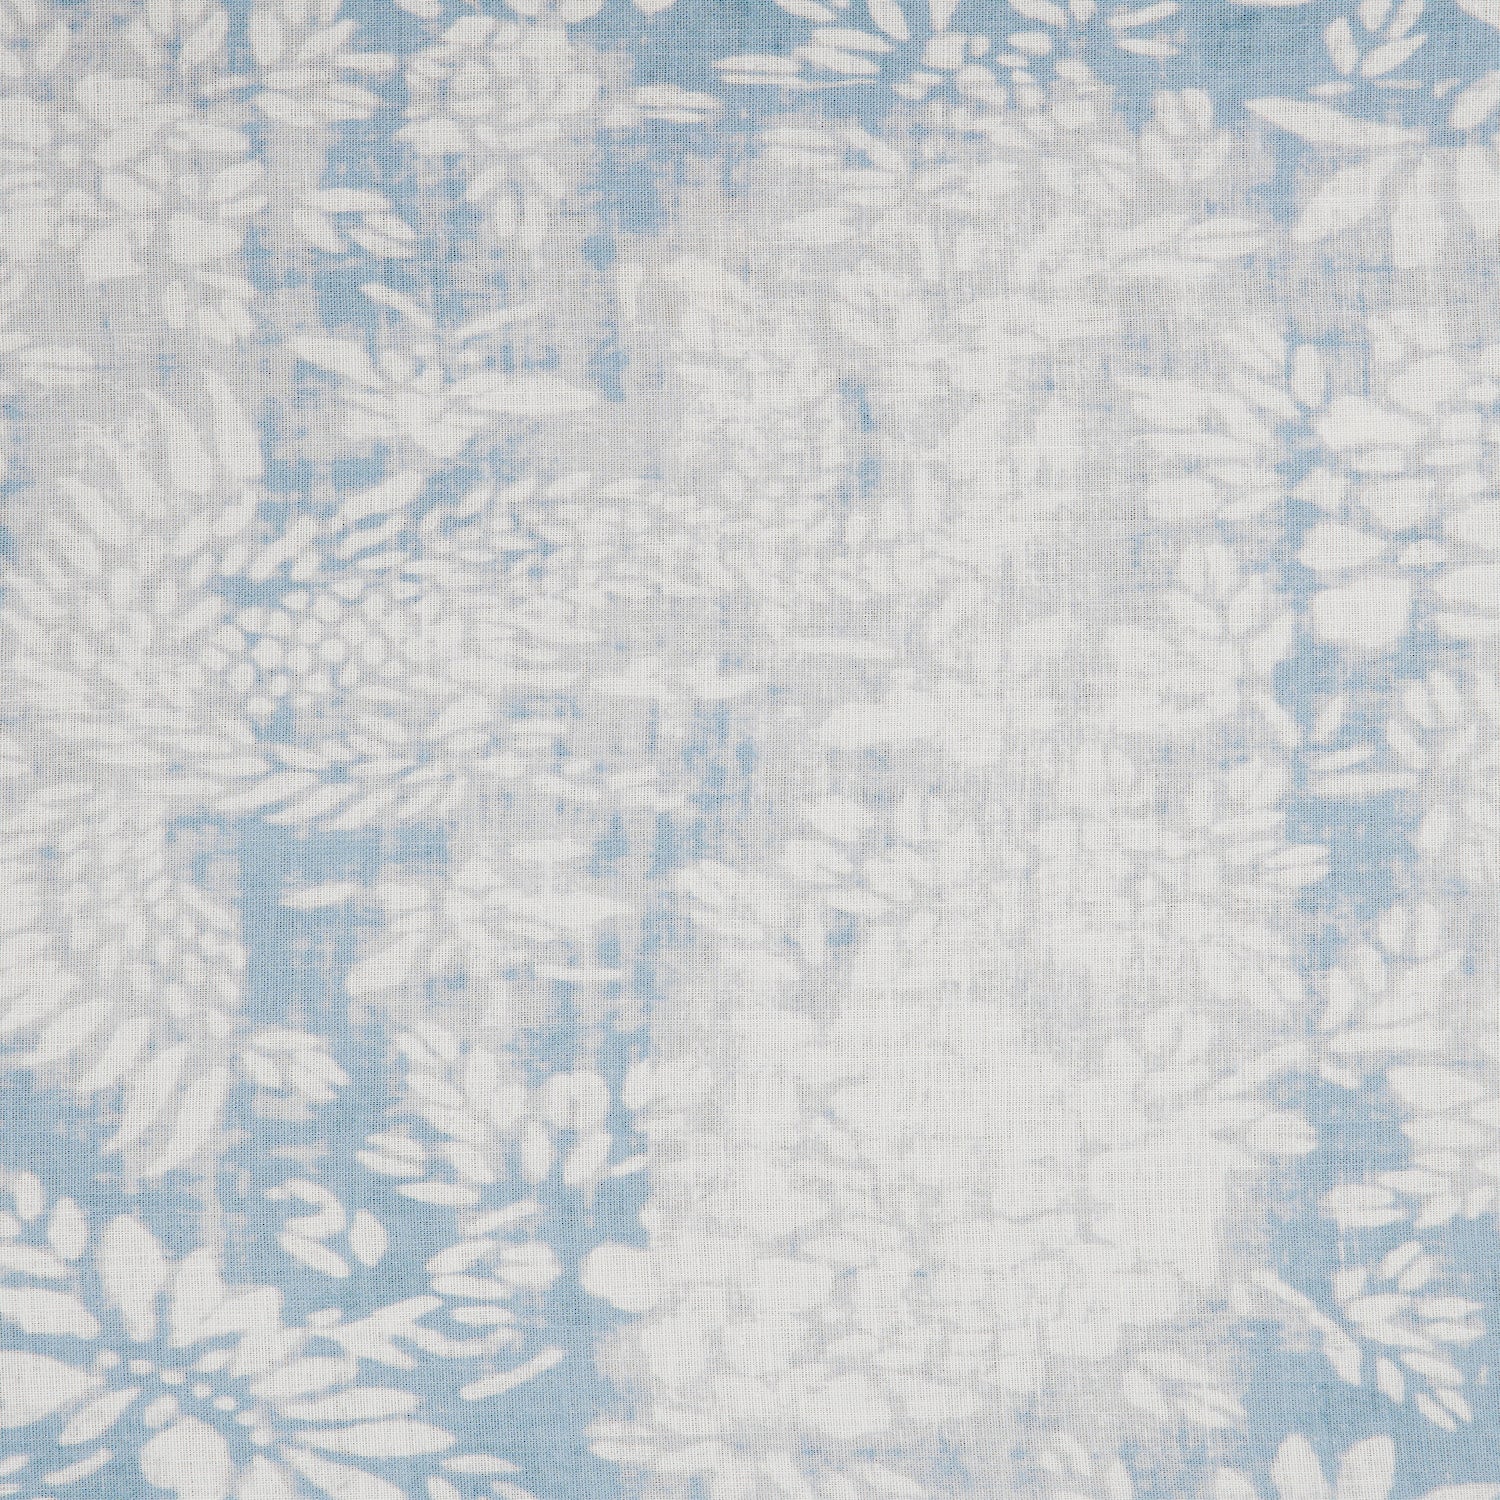 Detail of a linen fabric in a floral and leaf pattern in white on a mottled blue and gray field.